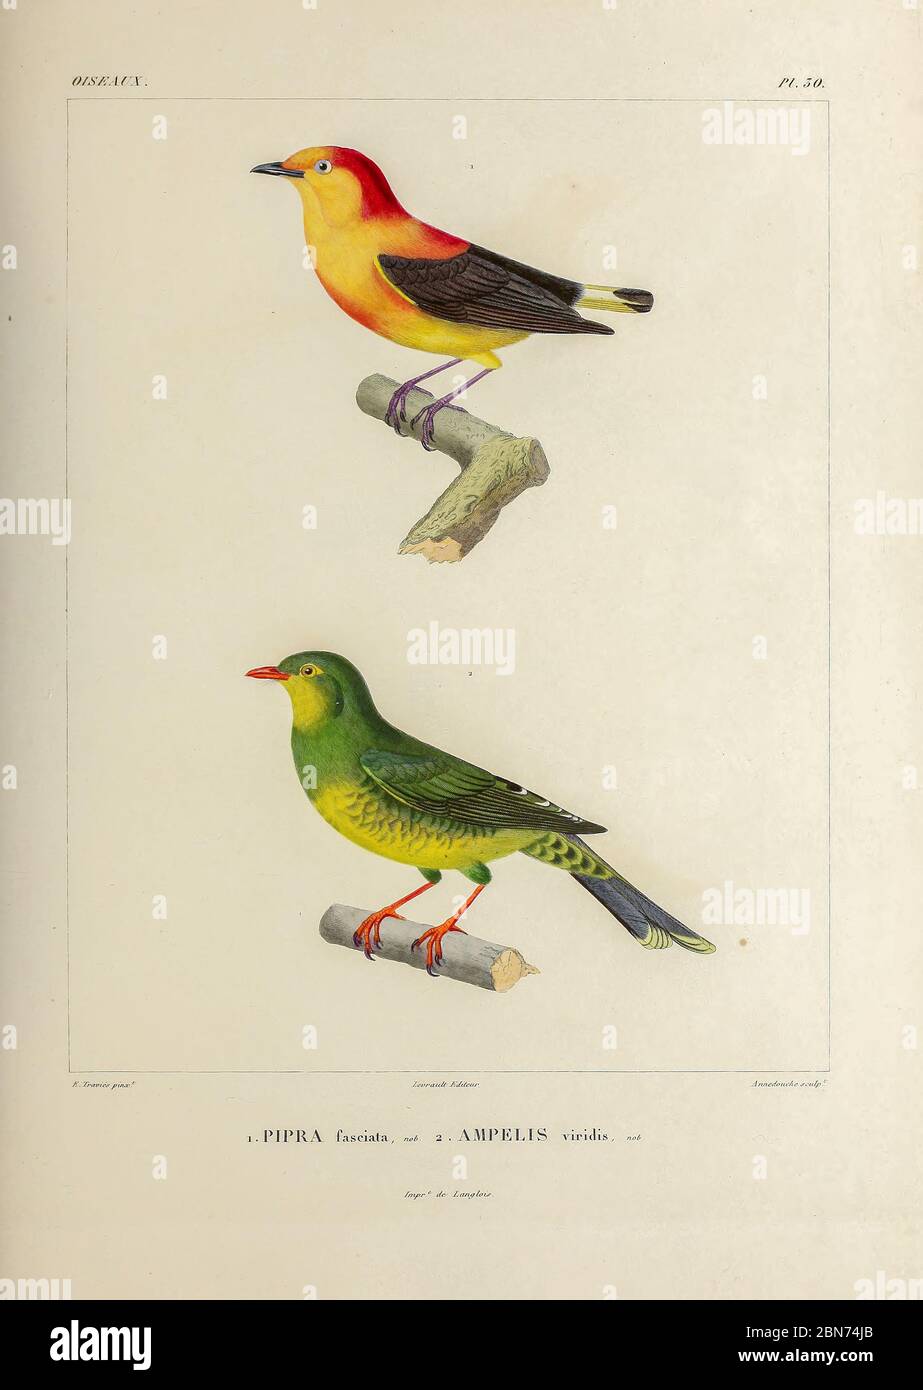 hand coloured sketch Top: Subspecies of Band-tailed Manakin (Pipra fasciicauda fasciicauda [Here as Pipra fasciata]) Bottom: Subspecies of Band-tailed Fruiteater (Pipreola intermedia signat [Here as Ampelis viridis]) From the book 'Voyage dans l'Amérique Méridionale' [Journey to South America: (Brazil, the eastern republic of Uruguay, the Argentine Republic, Patagonia, the republic of Chile, the republic of Bolivia, the republic of Peru), executed during the years 1826 - 1833] 4th volume Part 3 By: Orbigny, Alcide Dessalines d', d'Orbigny, 1802-1857; Montagne, Jean François Camille, 1784-1866 Stock Photo